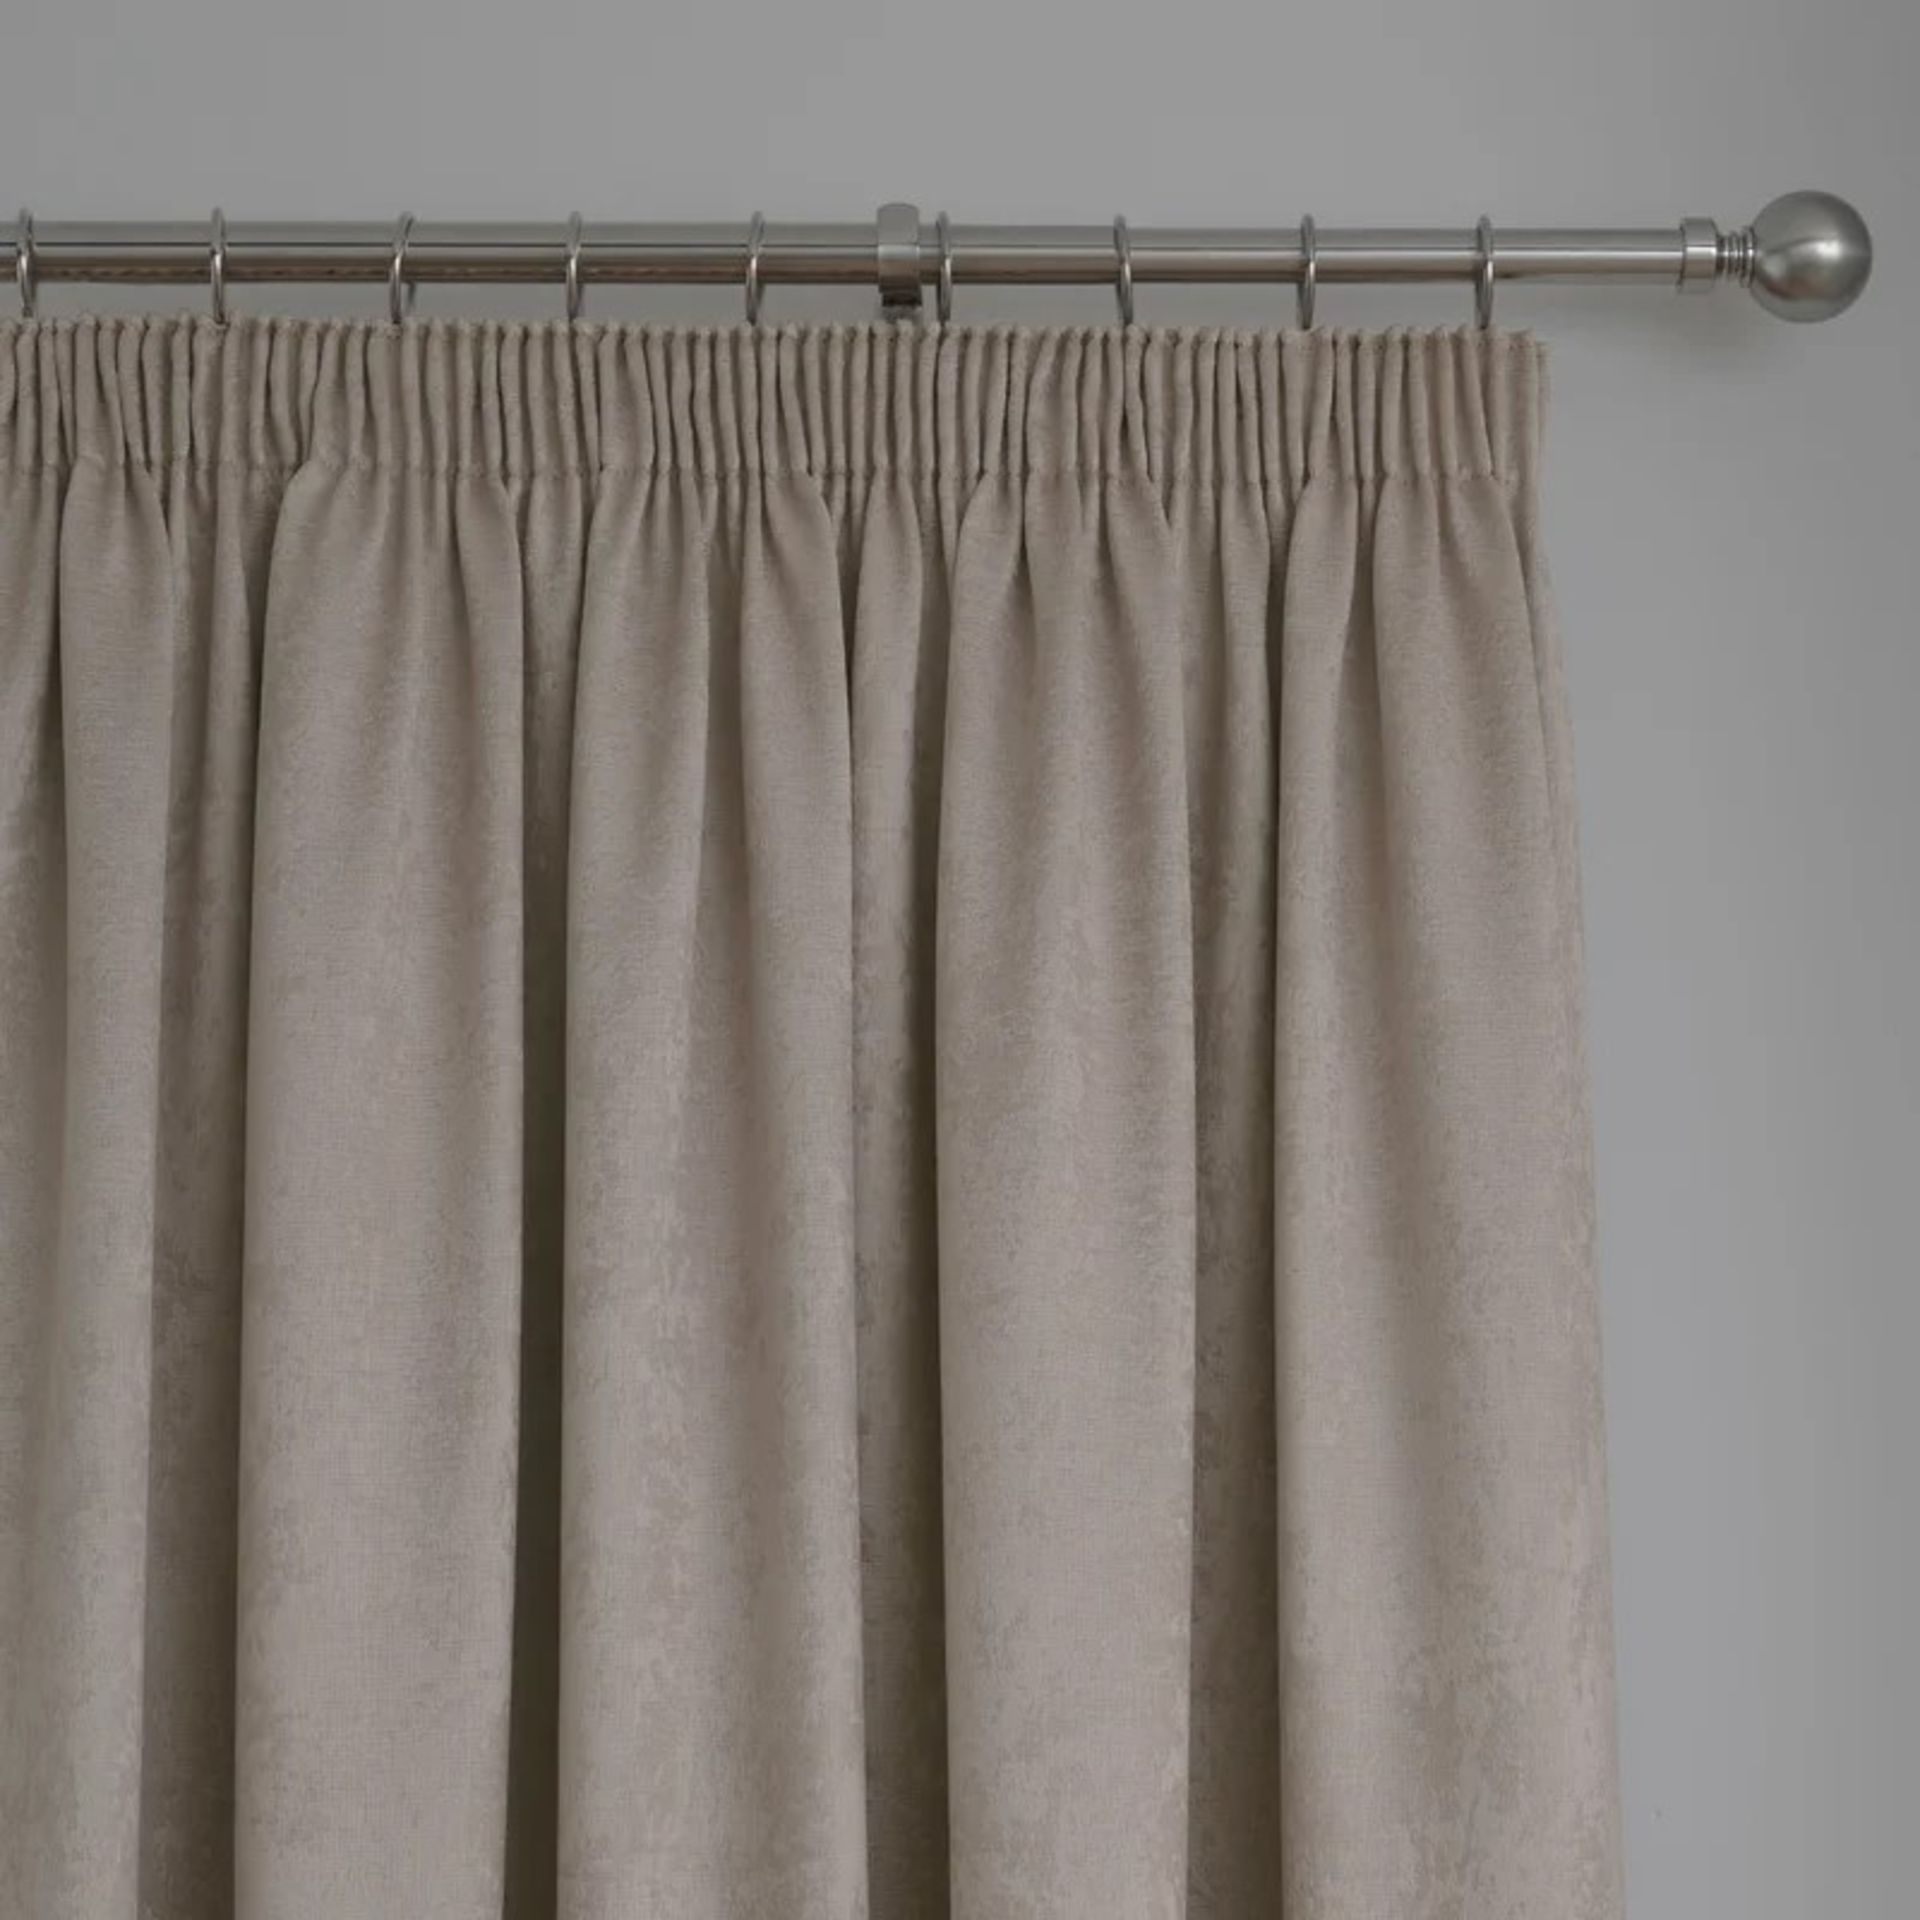 RRP £51.99 - Carianna Pencil Pleat Room Darkening Curtains (Set of 2) - Image 3 of 4